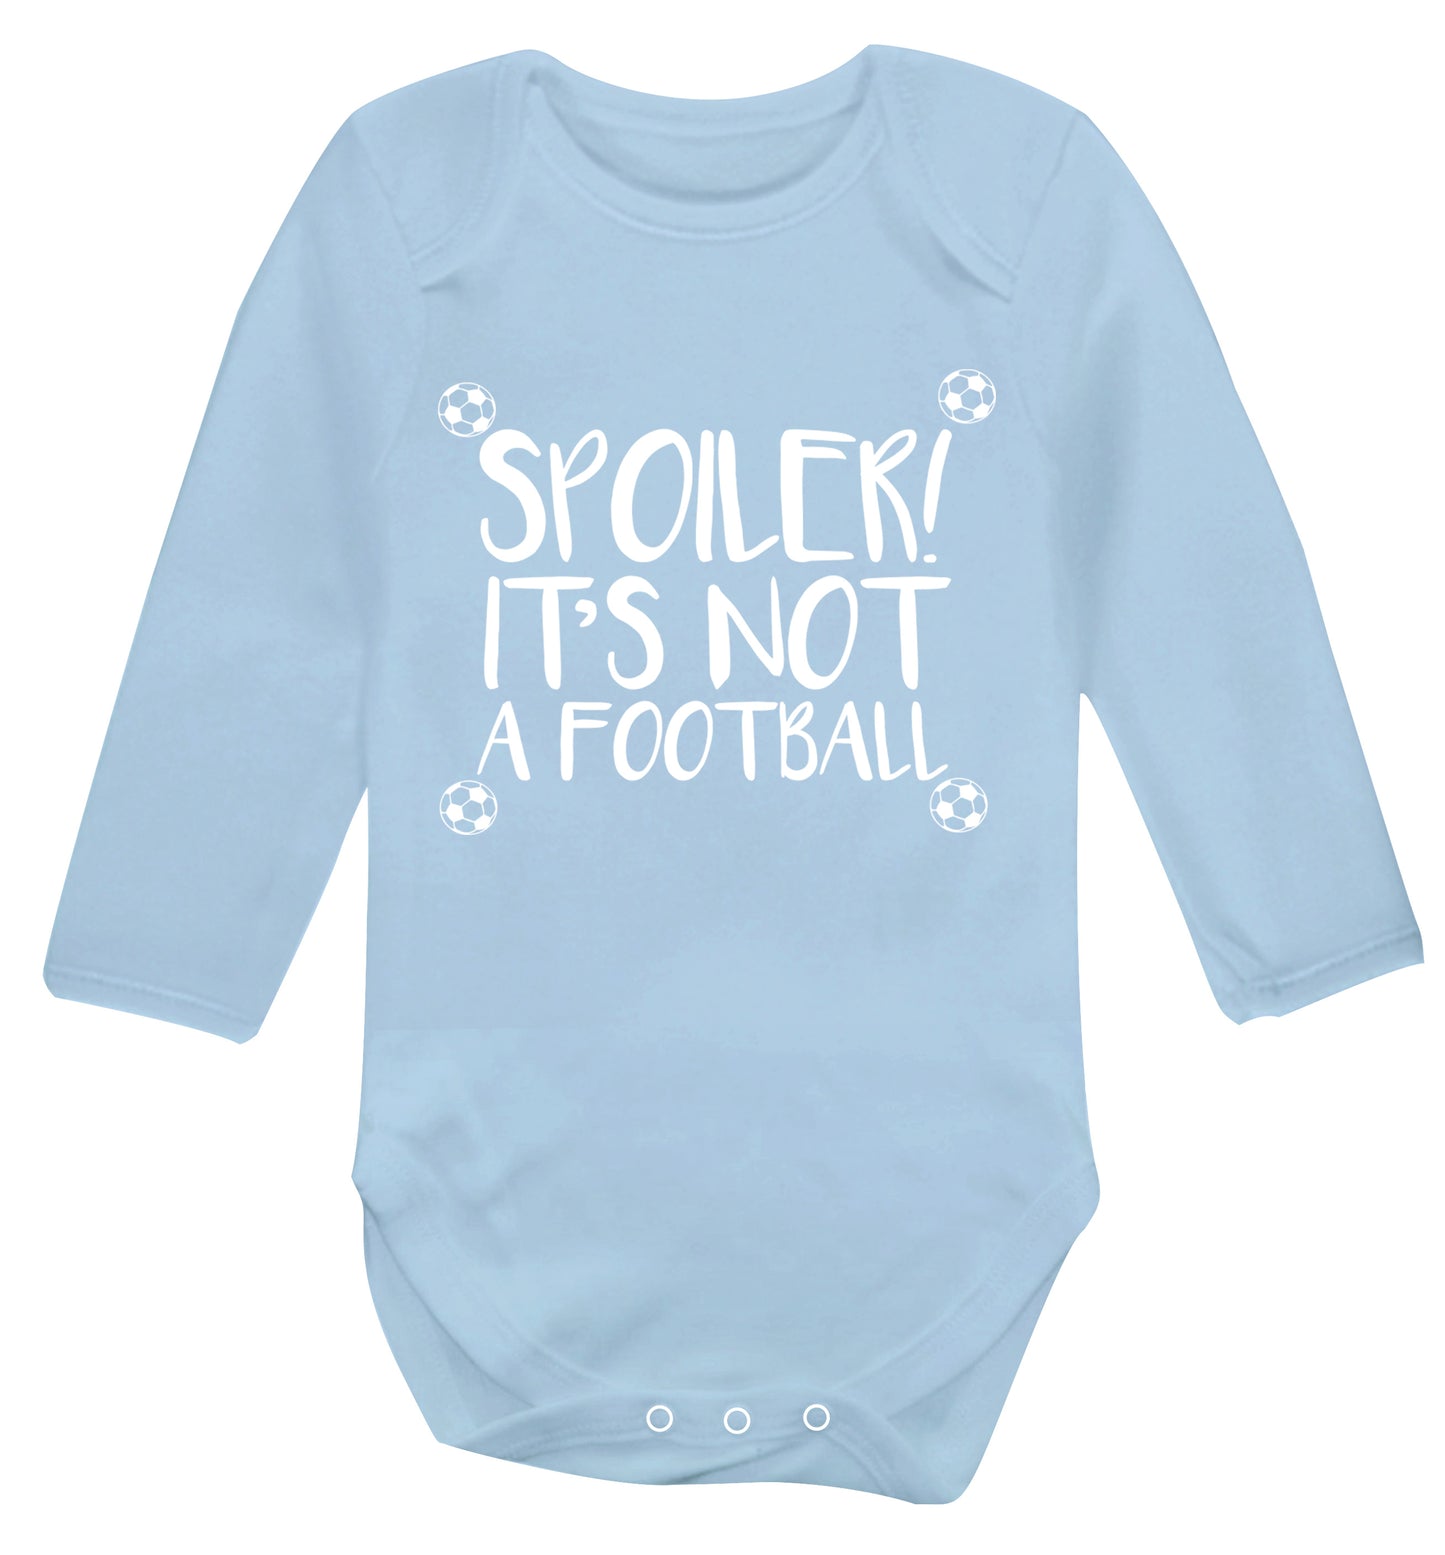 Spoiler it's not a football Baby Vest long sleeved pale blue 6-12 months